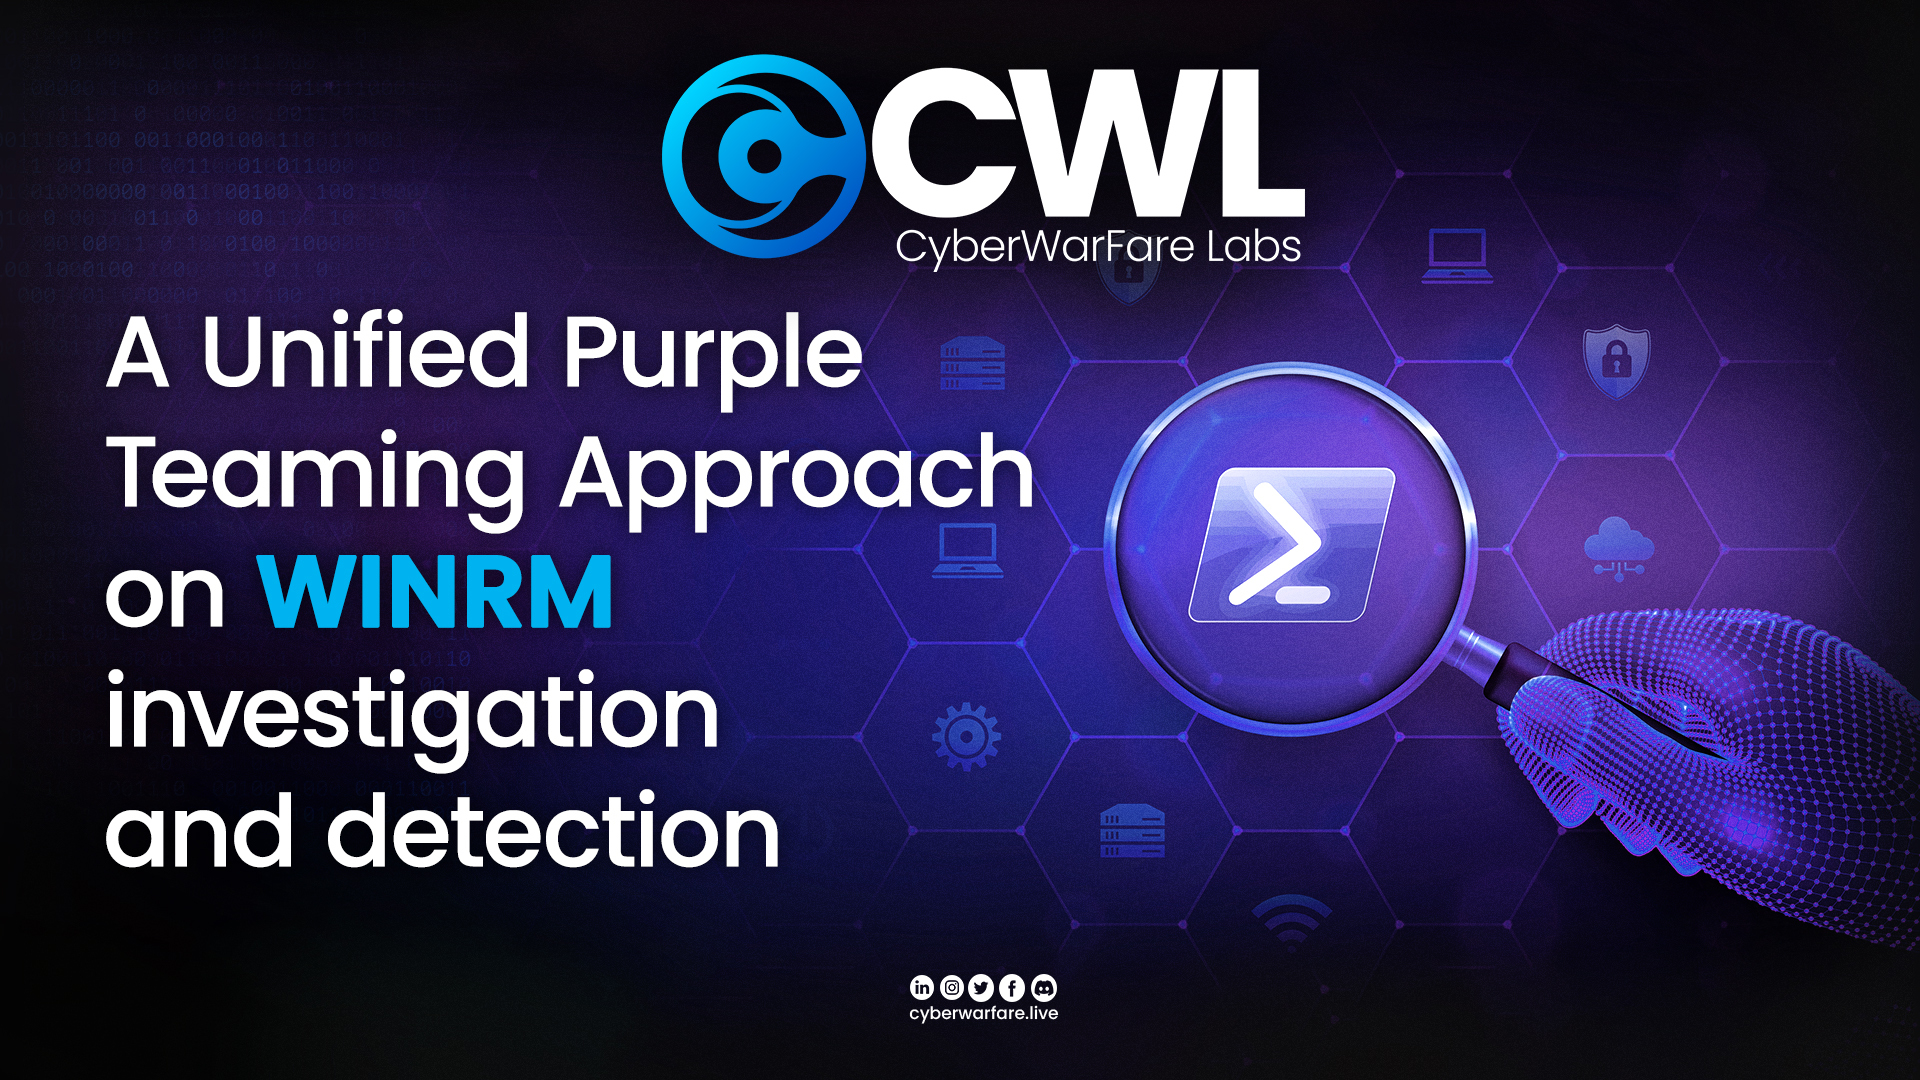 A Unified Purple Teaming Approach on WINRM investigation and detection